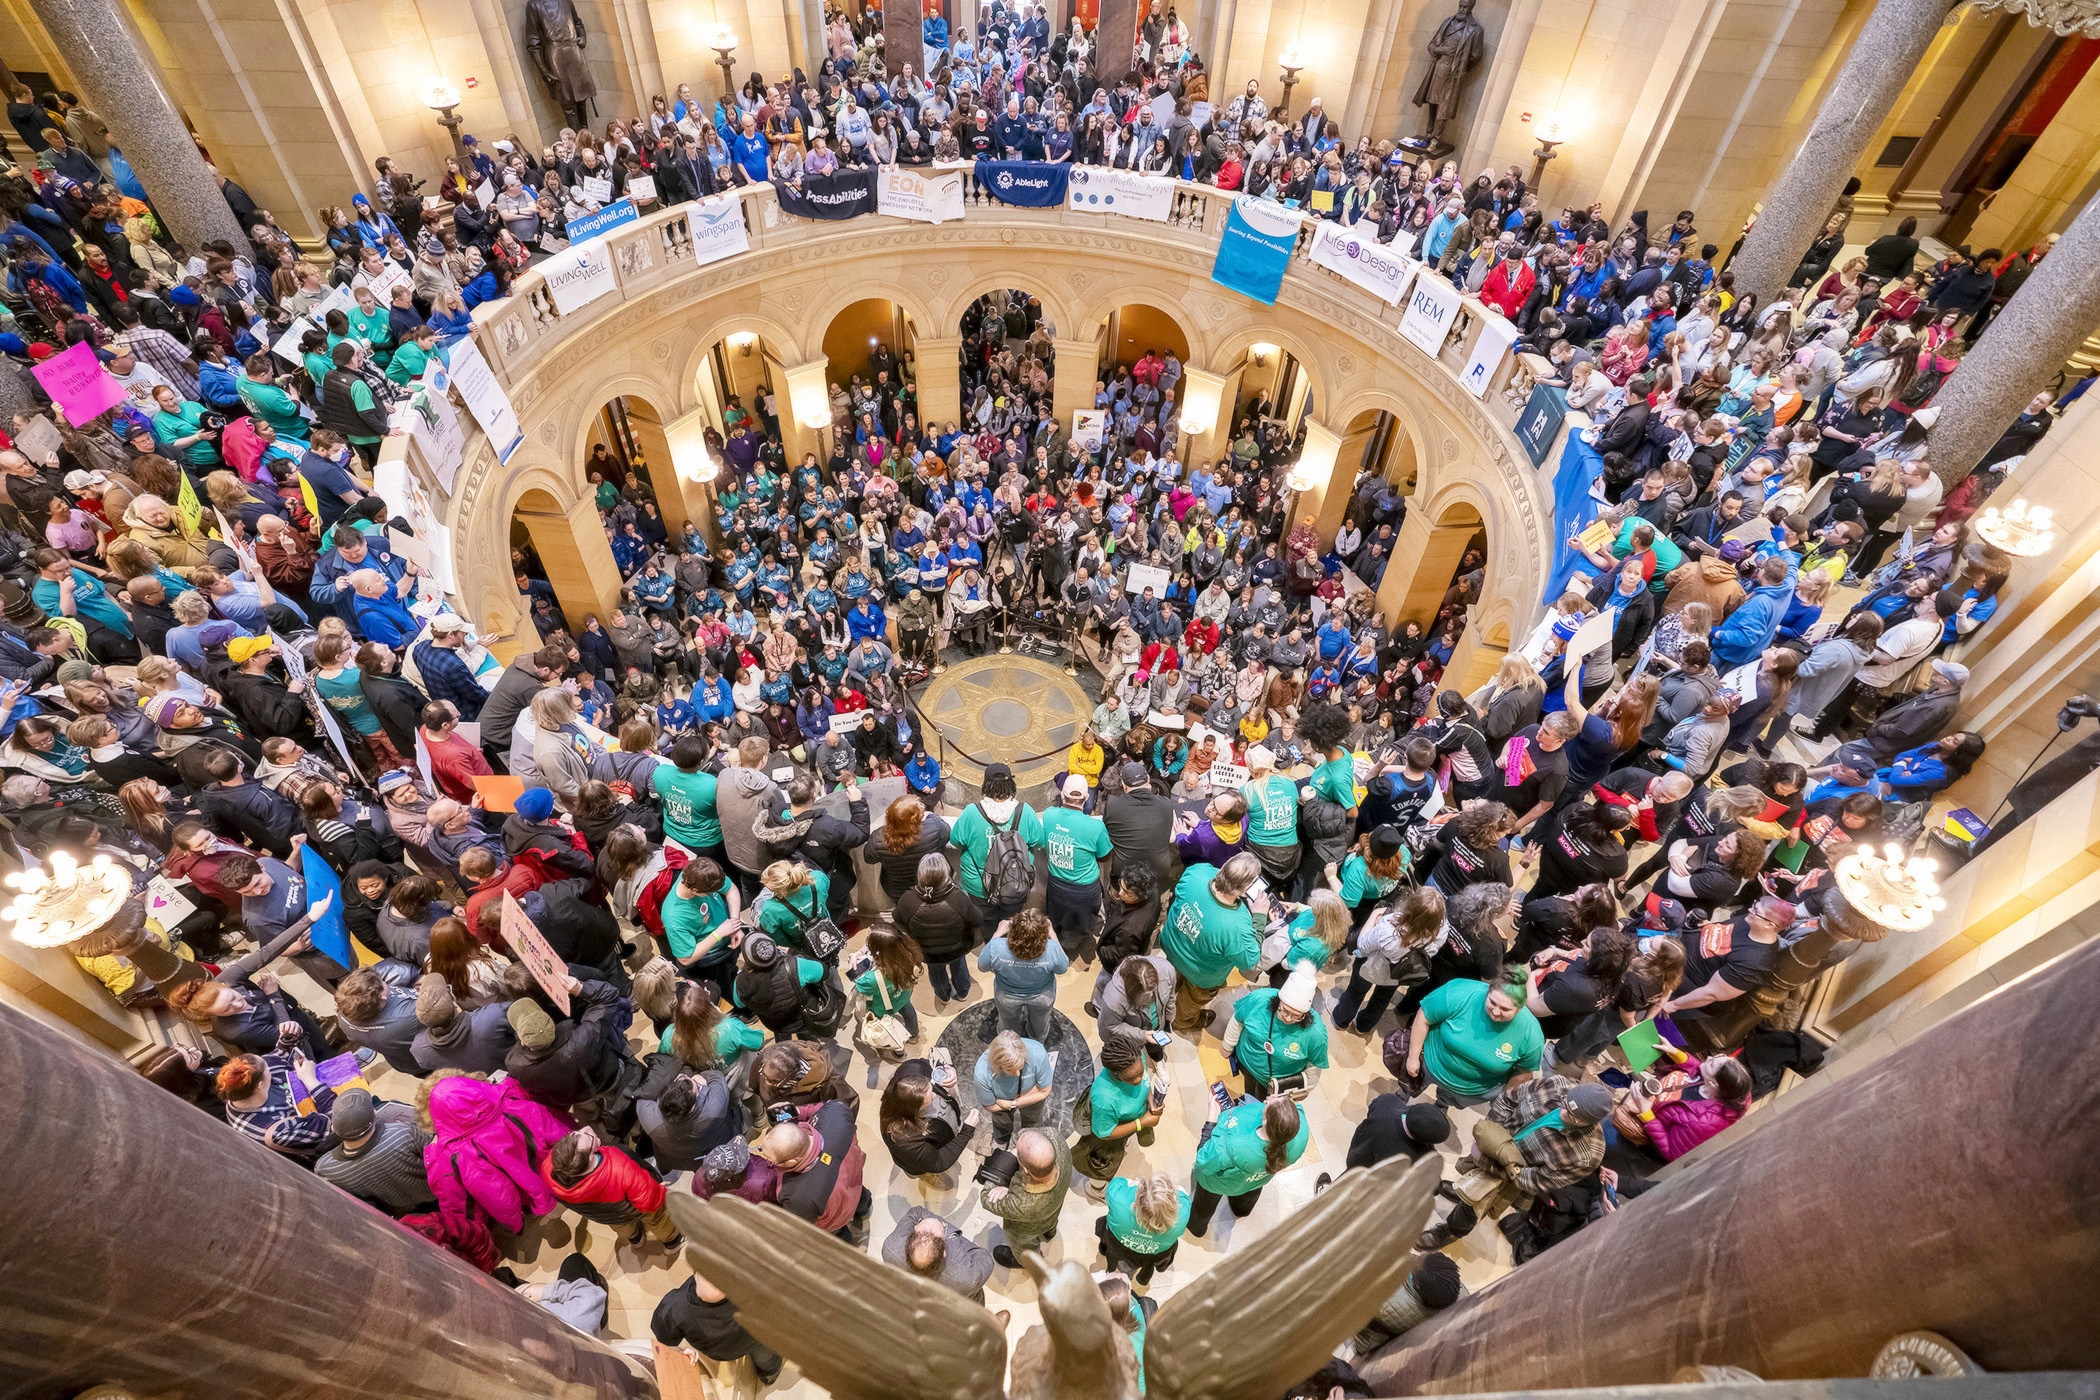 Throngs of people crowd the Capitol Rotunda March 19 for a rally during Disability Services Day at the Capitol. (Photo by Michele Jokinen)